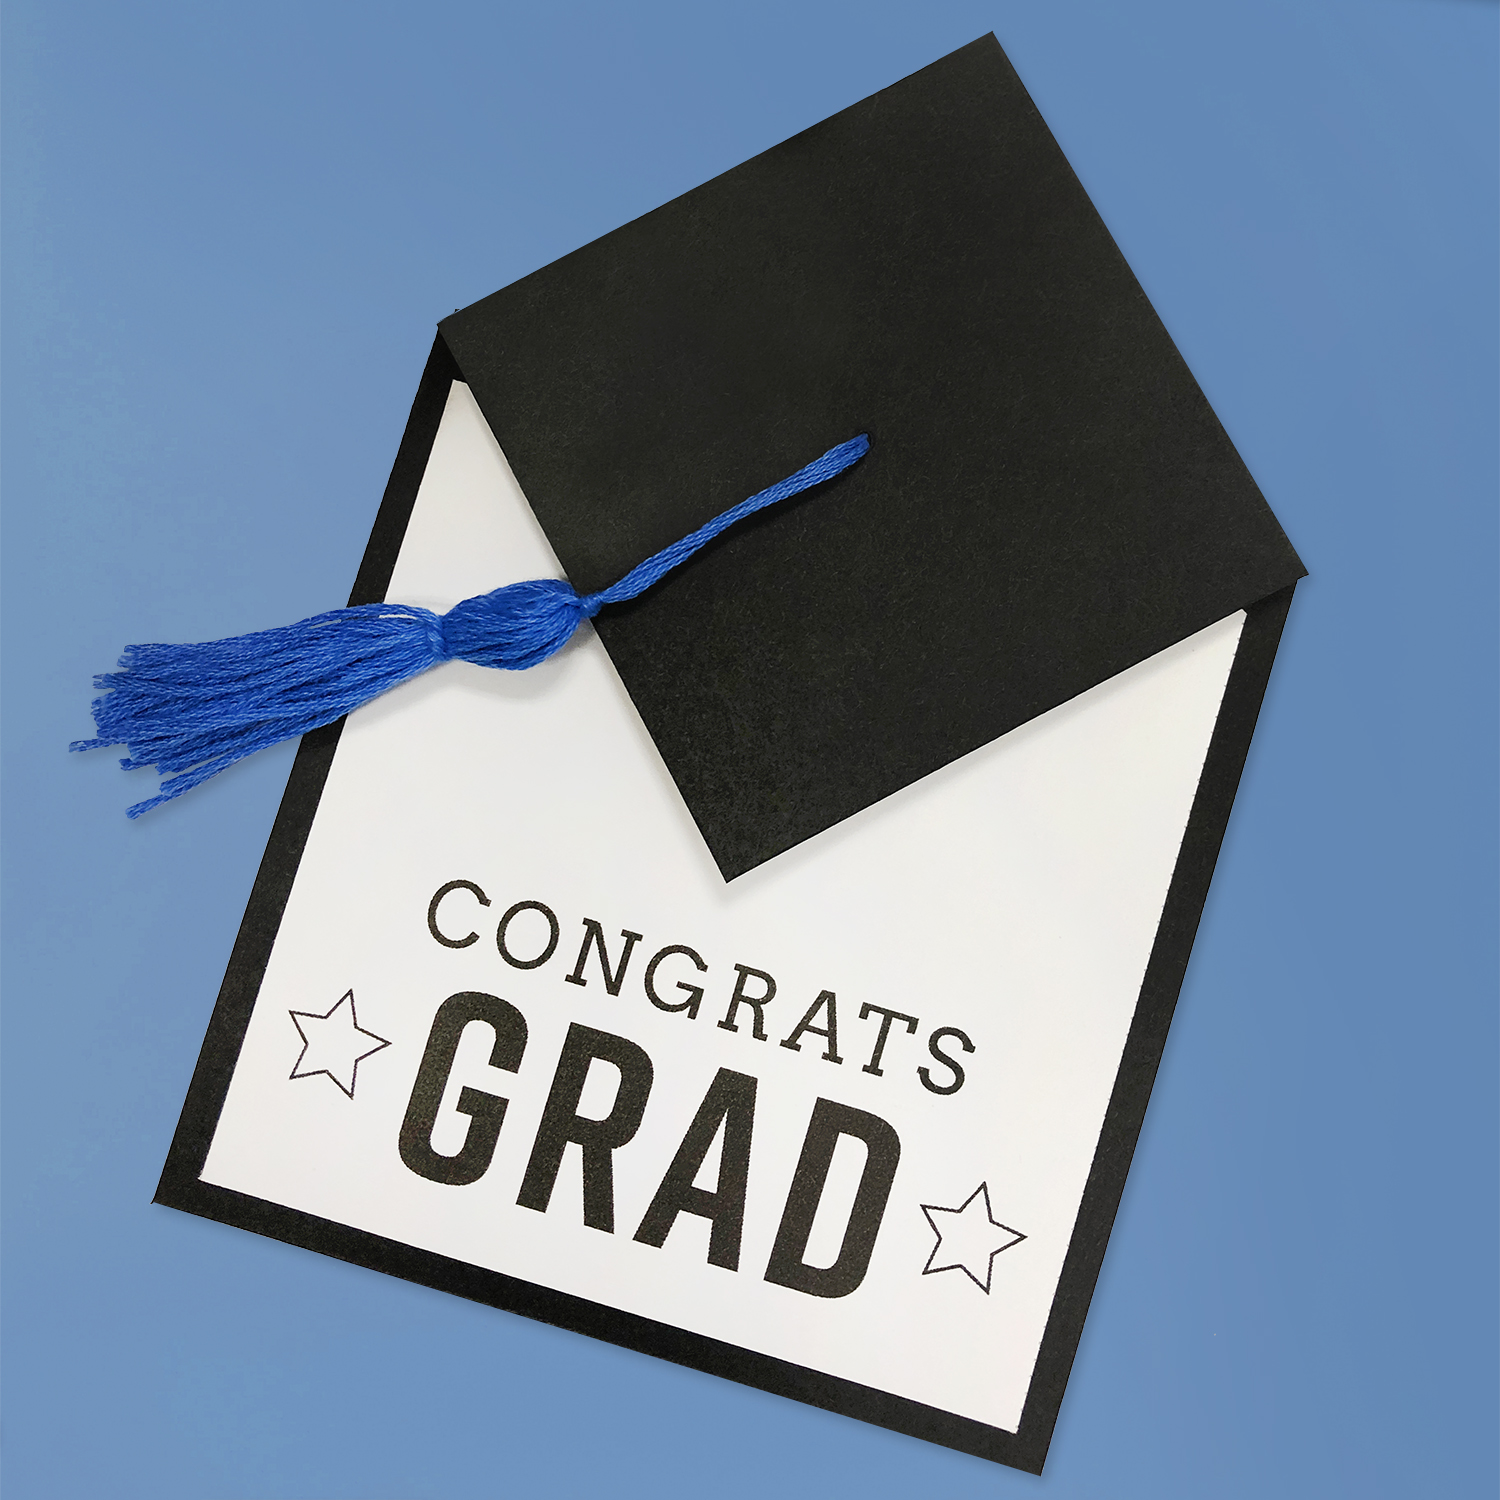 Download Printworks Graduation Projects And Printables Paris Corporation